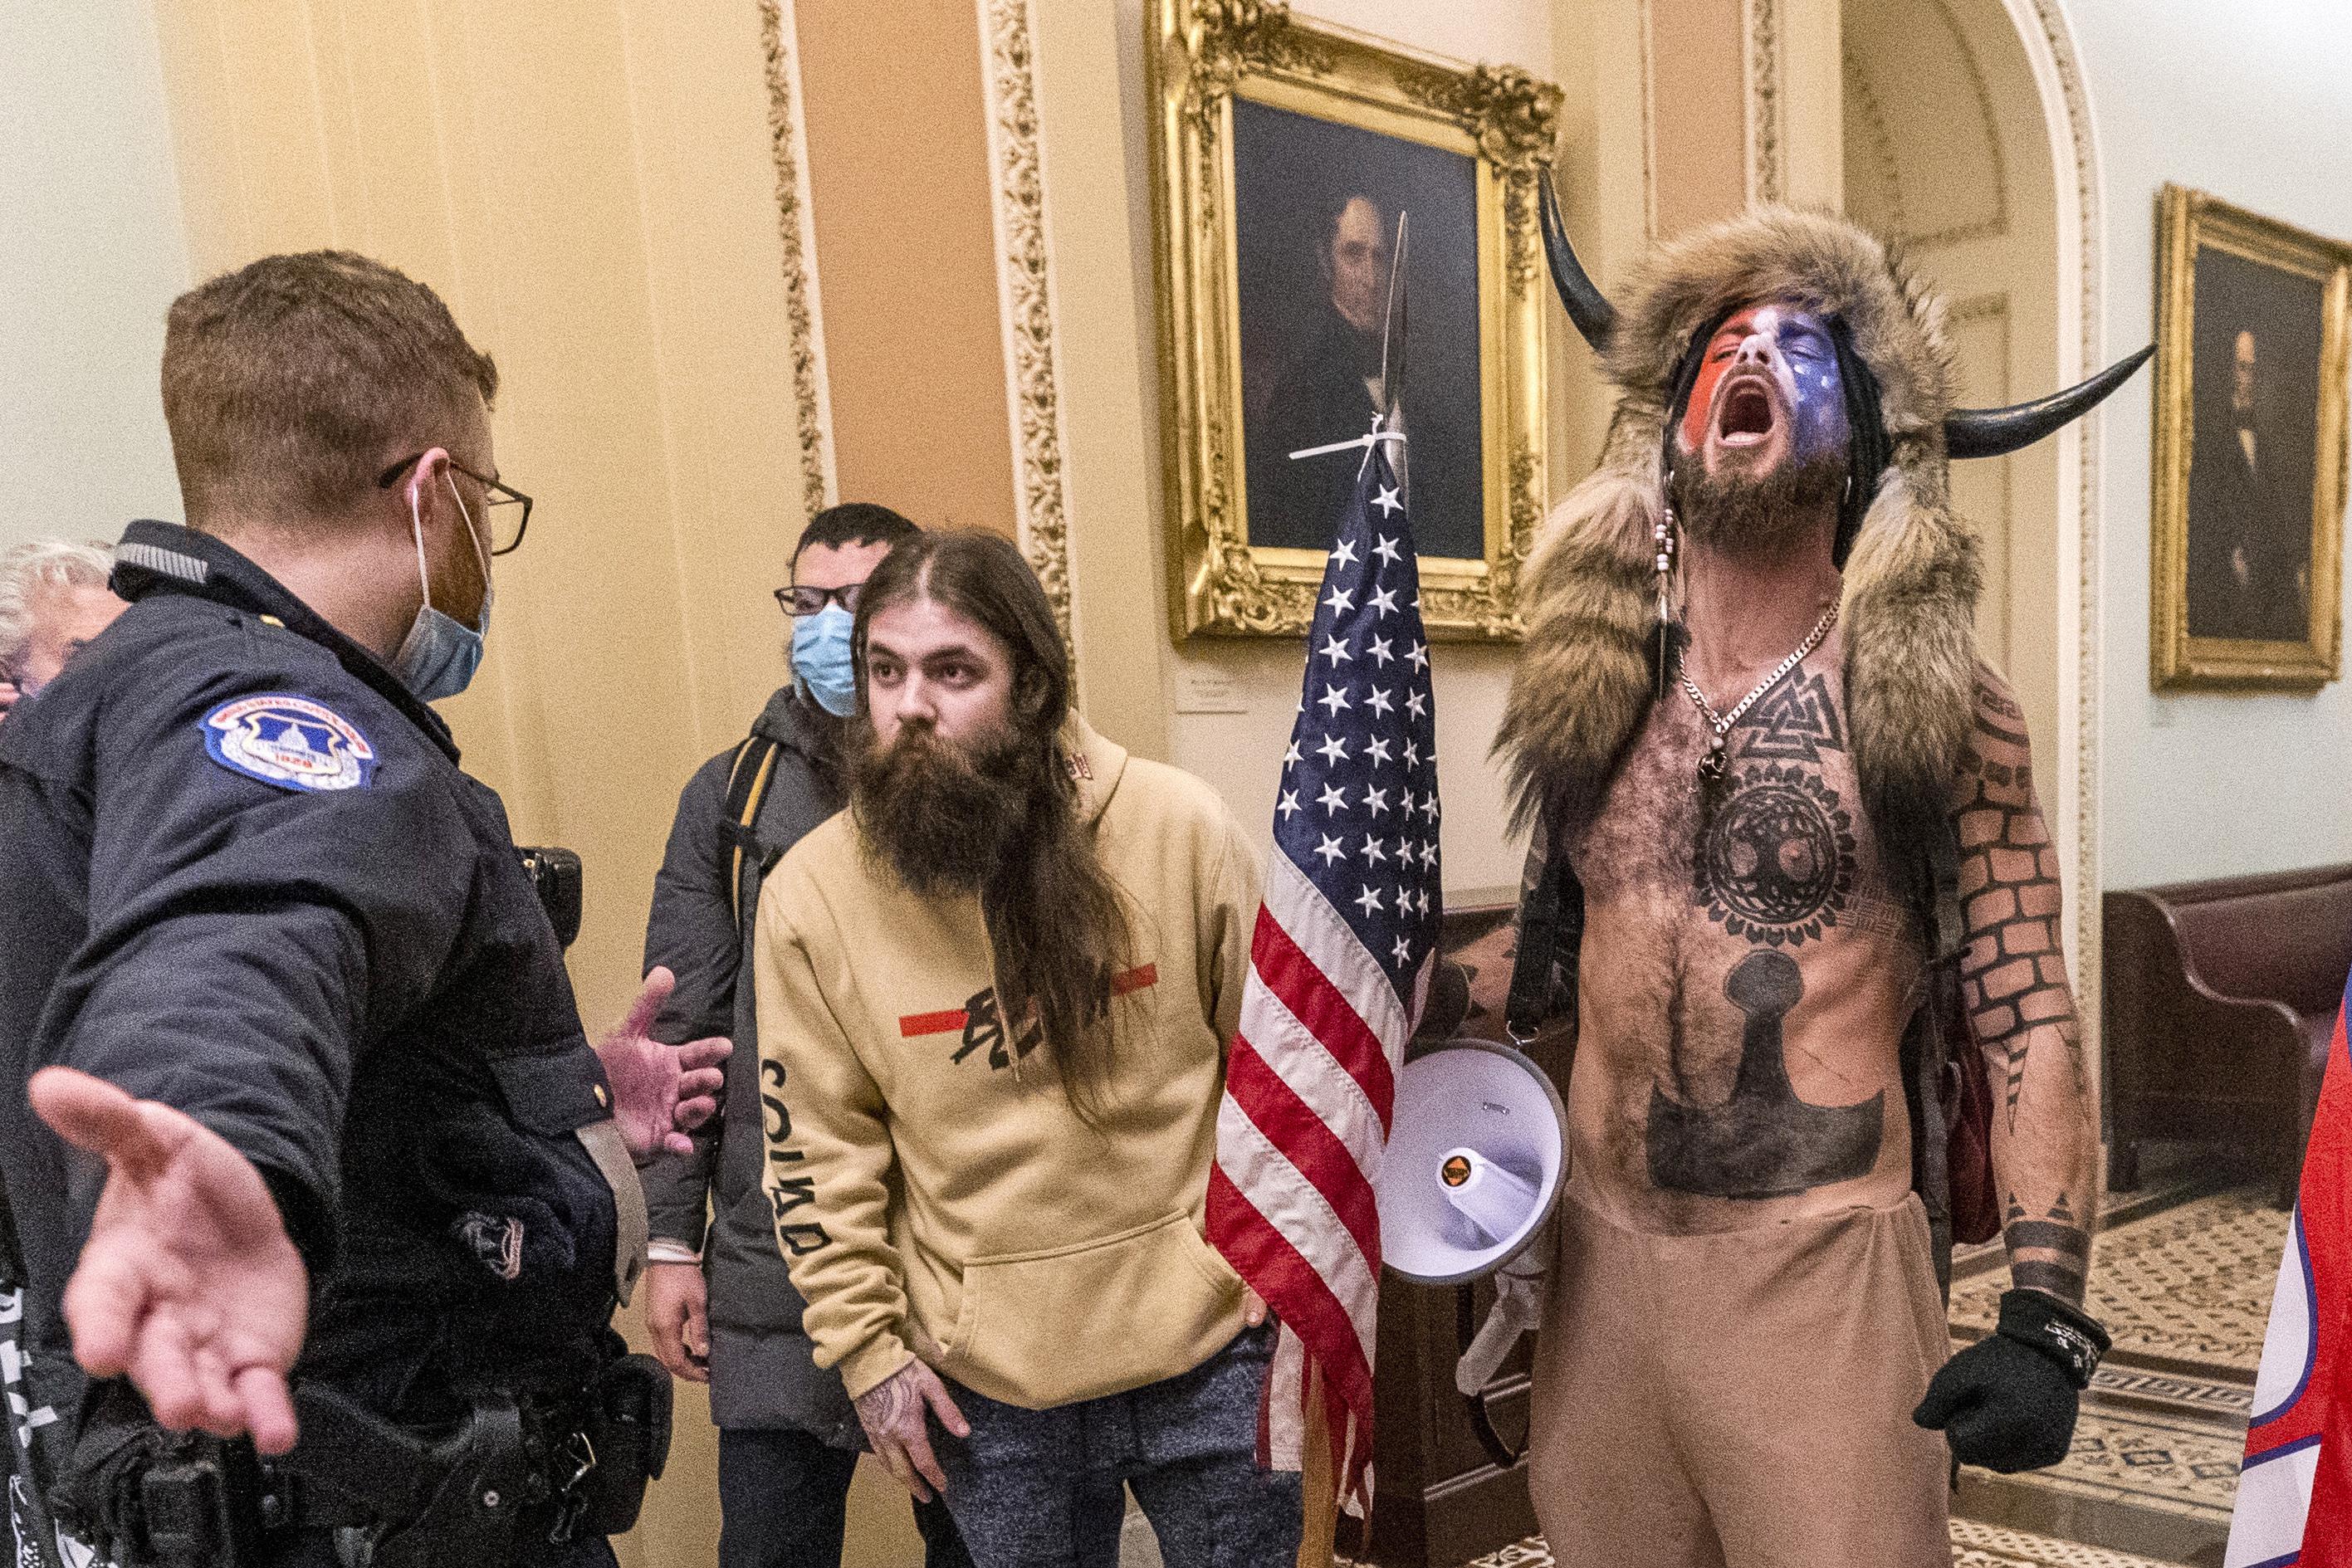 Man who wore horns in the US Capitol rebellion moved to Virginia prison